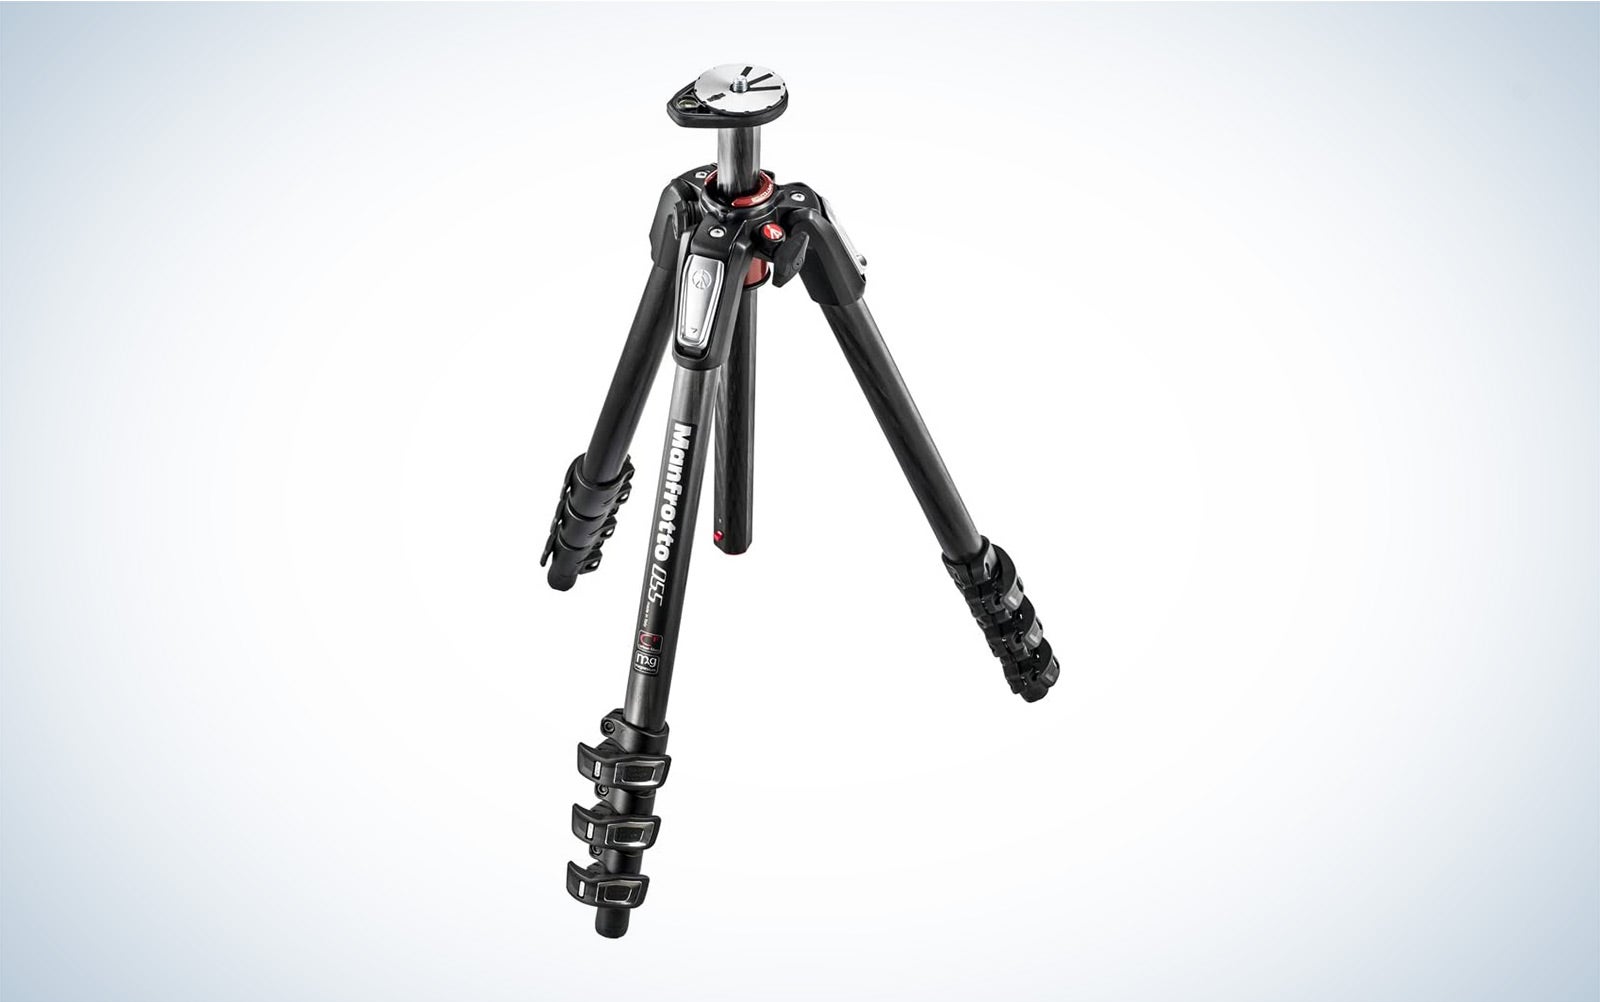 The Manfrotto 055 is the best overall carbon fiber tripod.